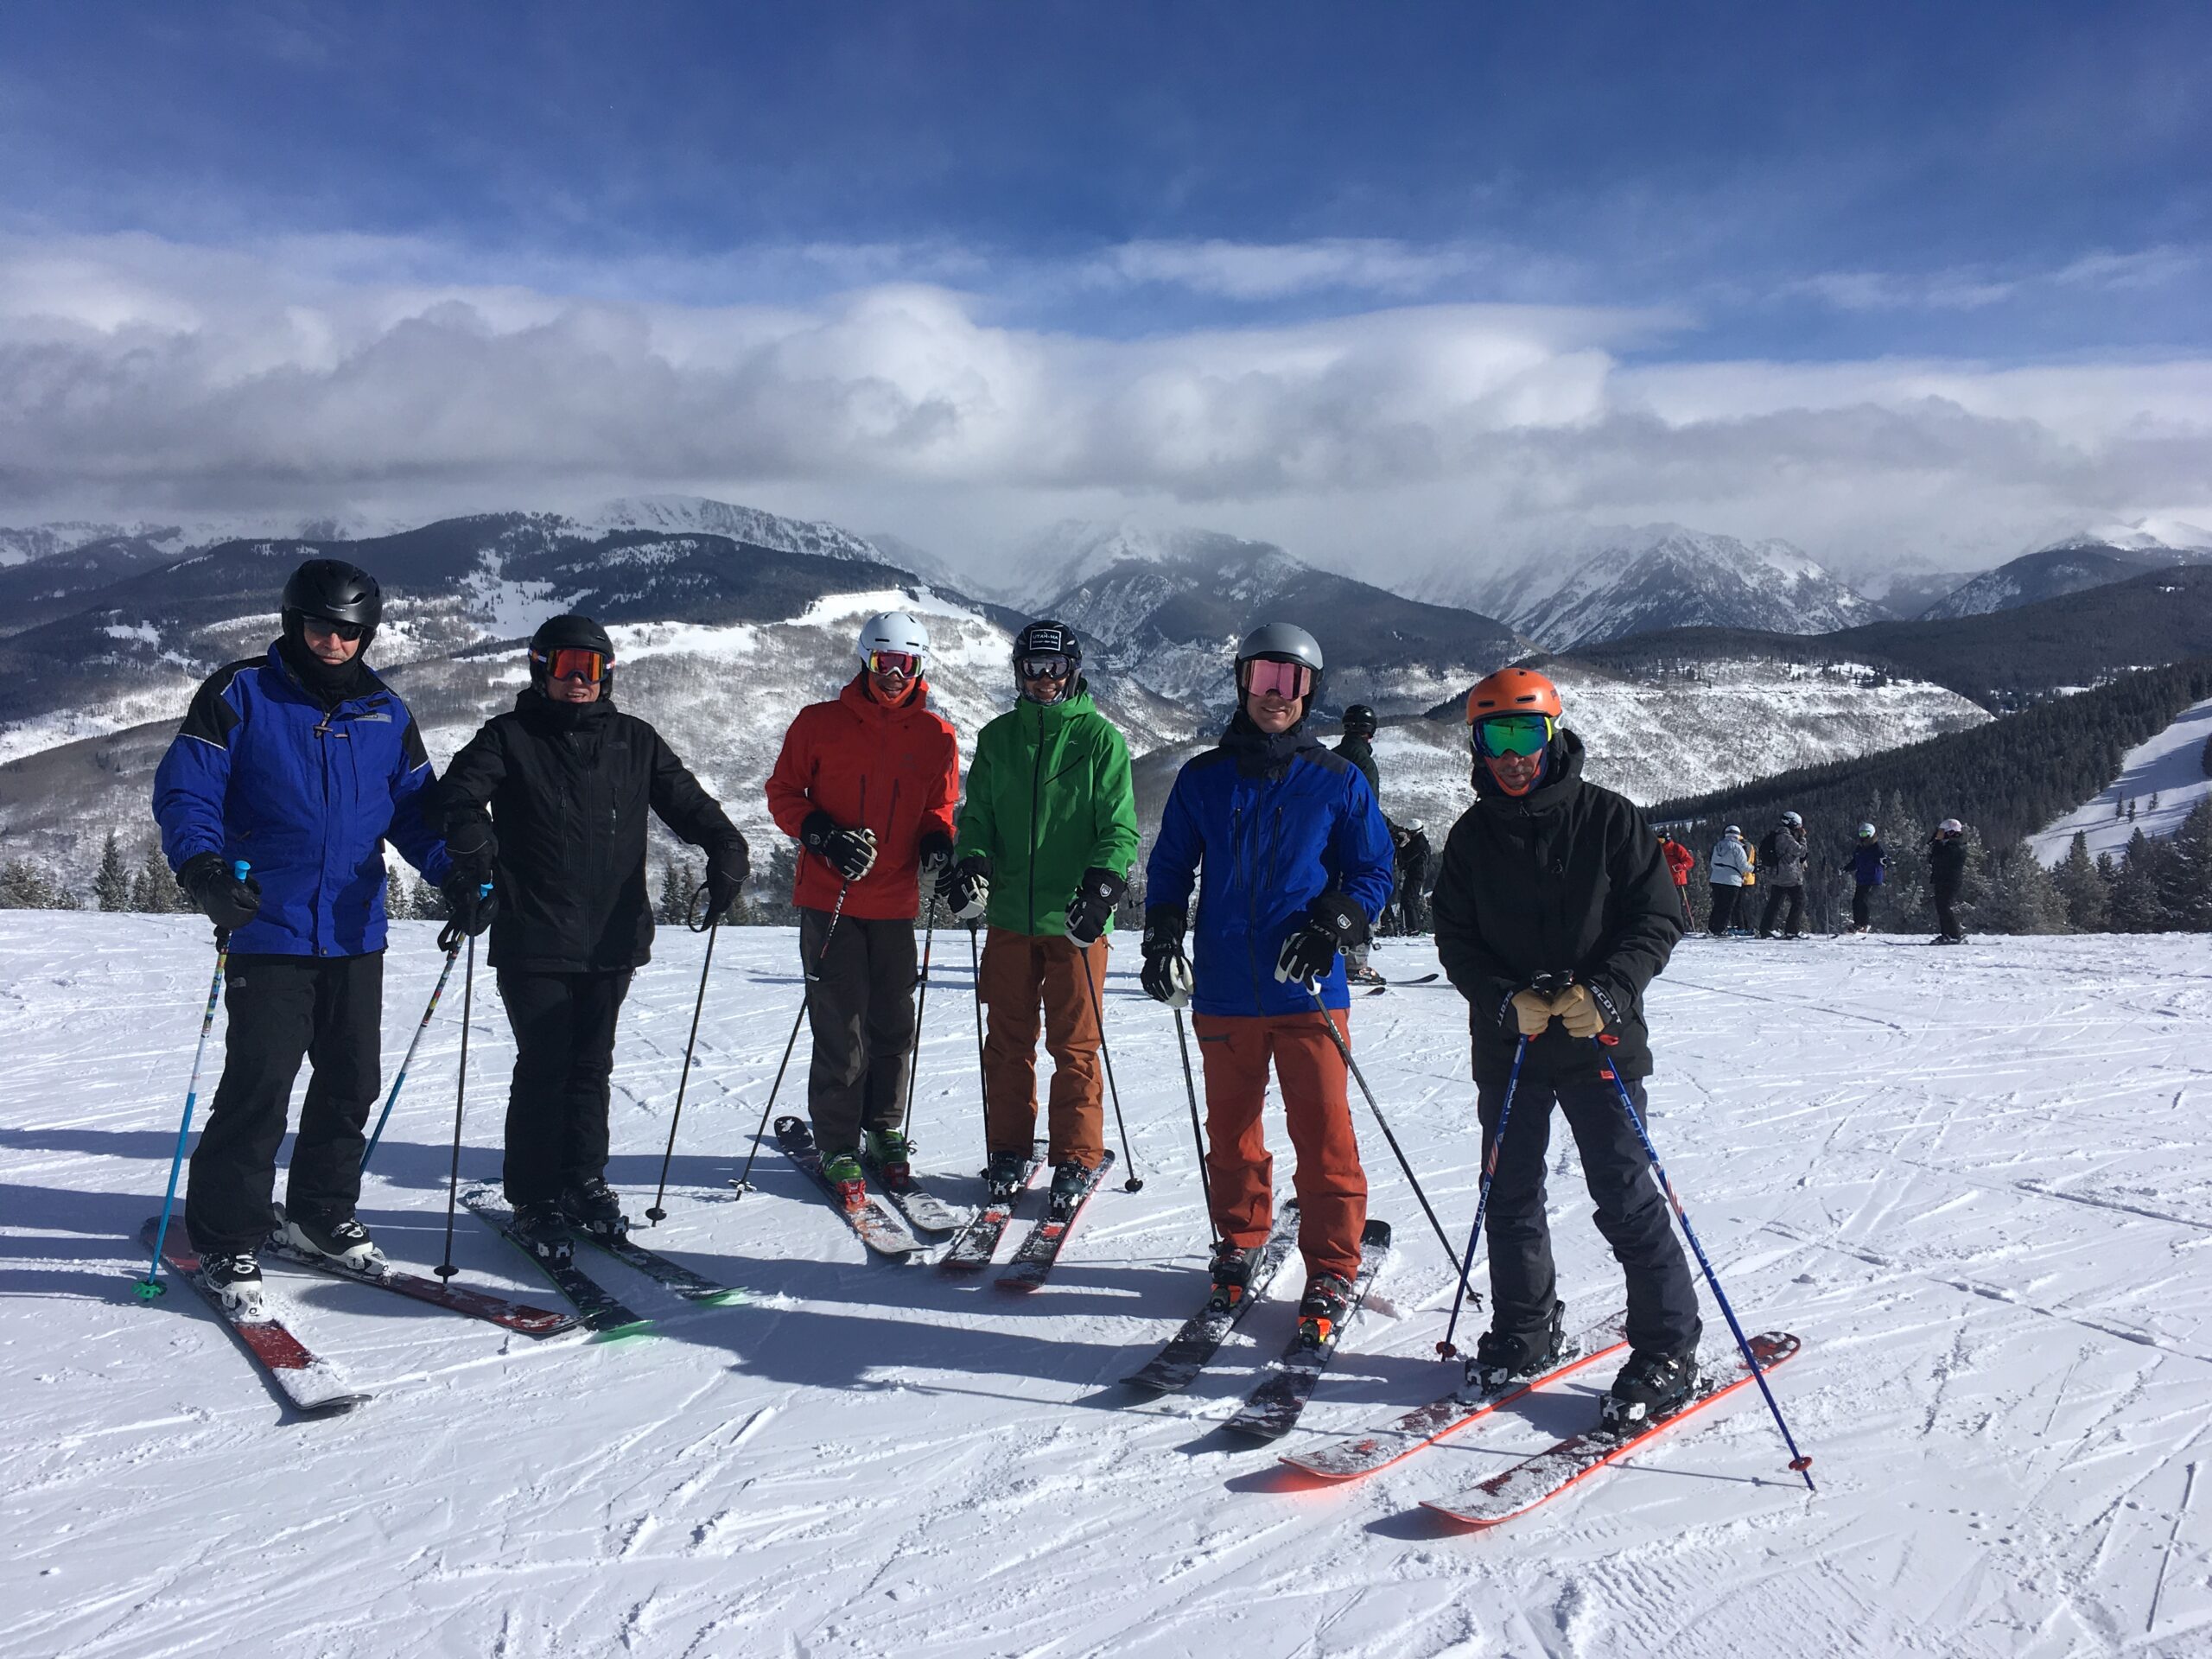 Supplies Network and HP Sponsor Ski for Hope February 11-13 in Vail